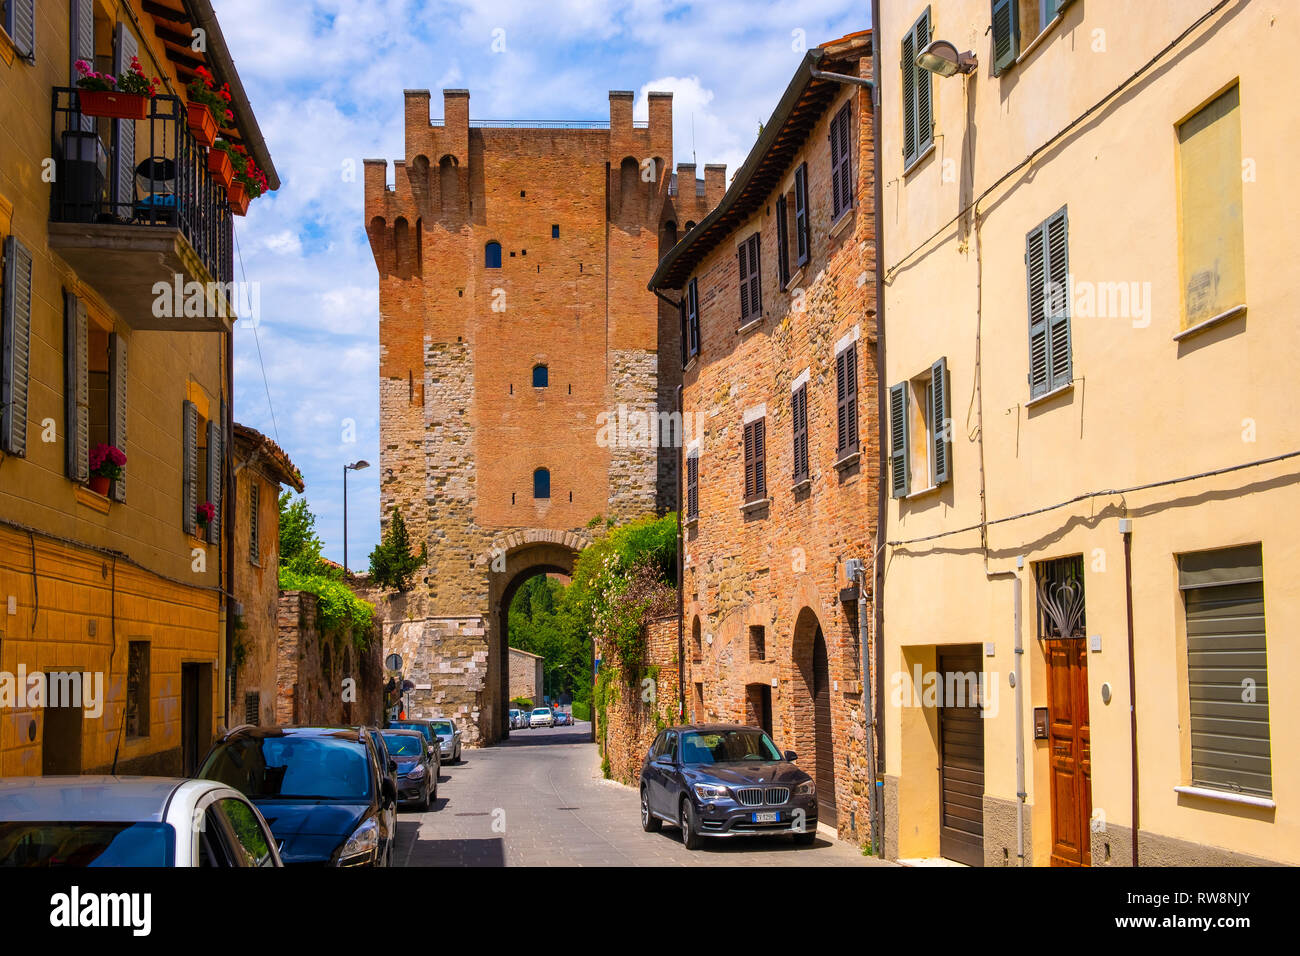 Perugia, Umbria / Italy - 2018/05/28: Stone tower and keep of St. Angelo Gate - Cassero di Porta Sant’Angelo - at the St. Michel Archangel Church in t Stock Photo